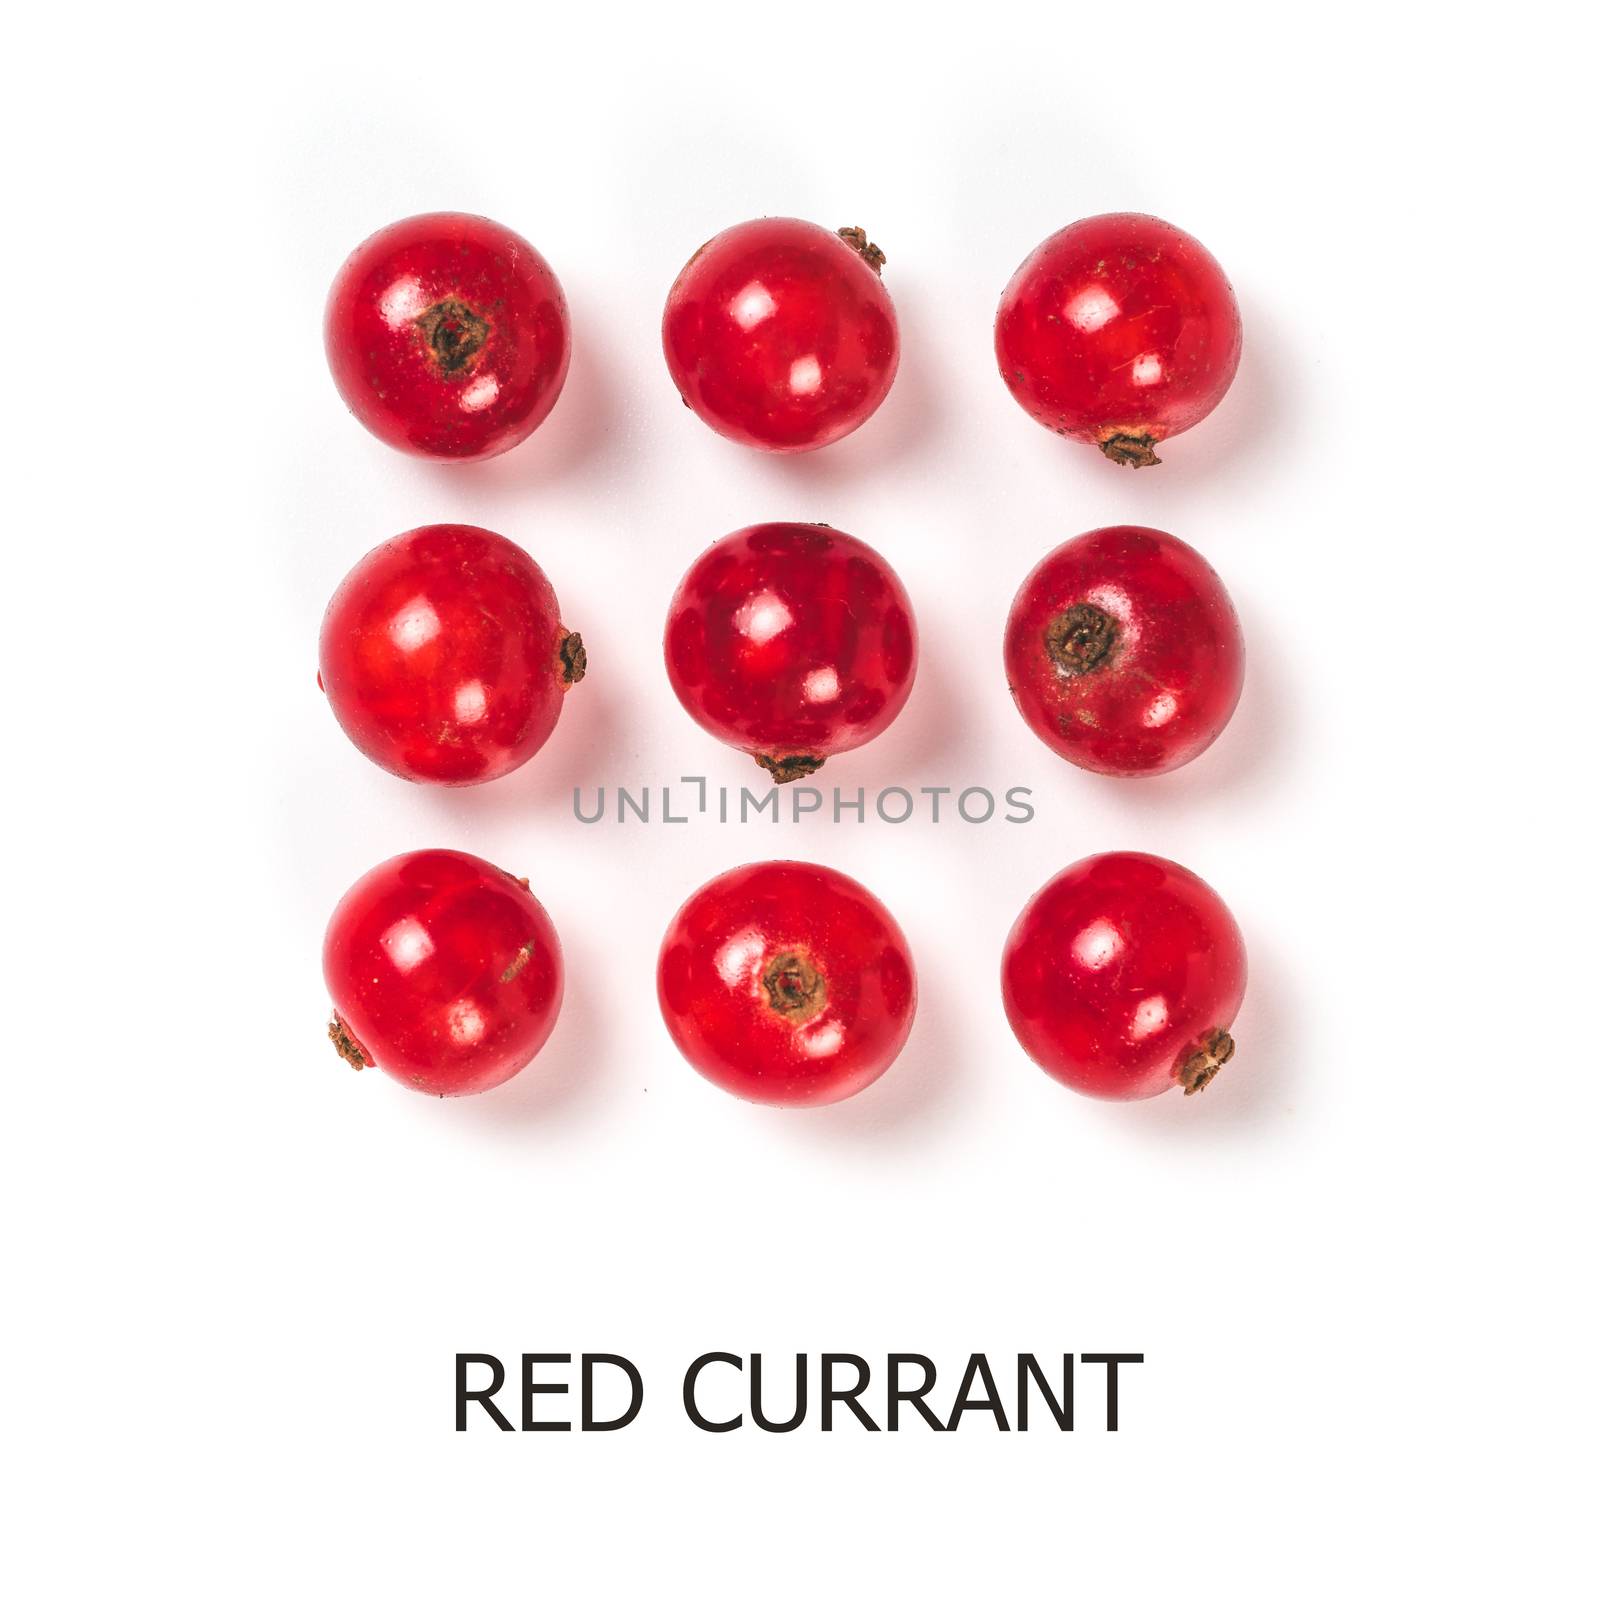 Creative layout - branch of red currant. Food and diet concept. Top view of ripe red currant with copy space. Isolated on white with clipping path.